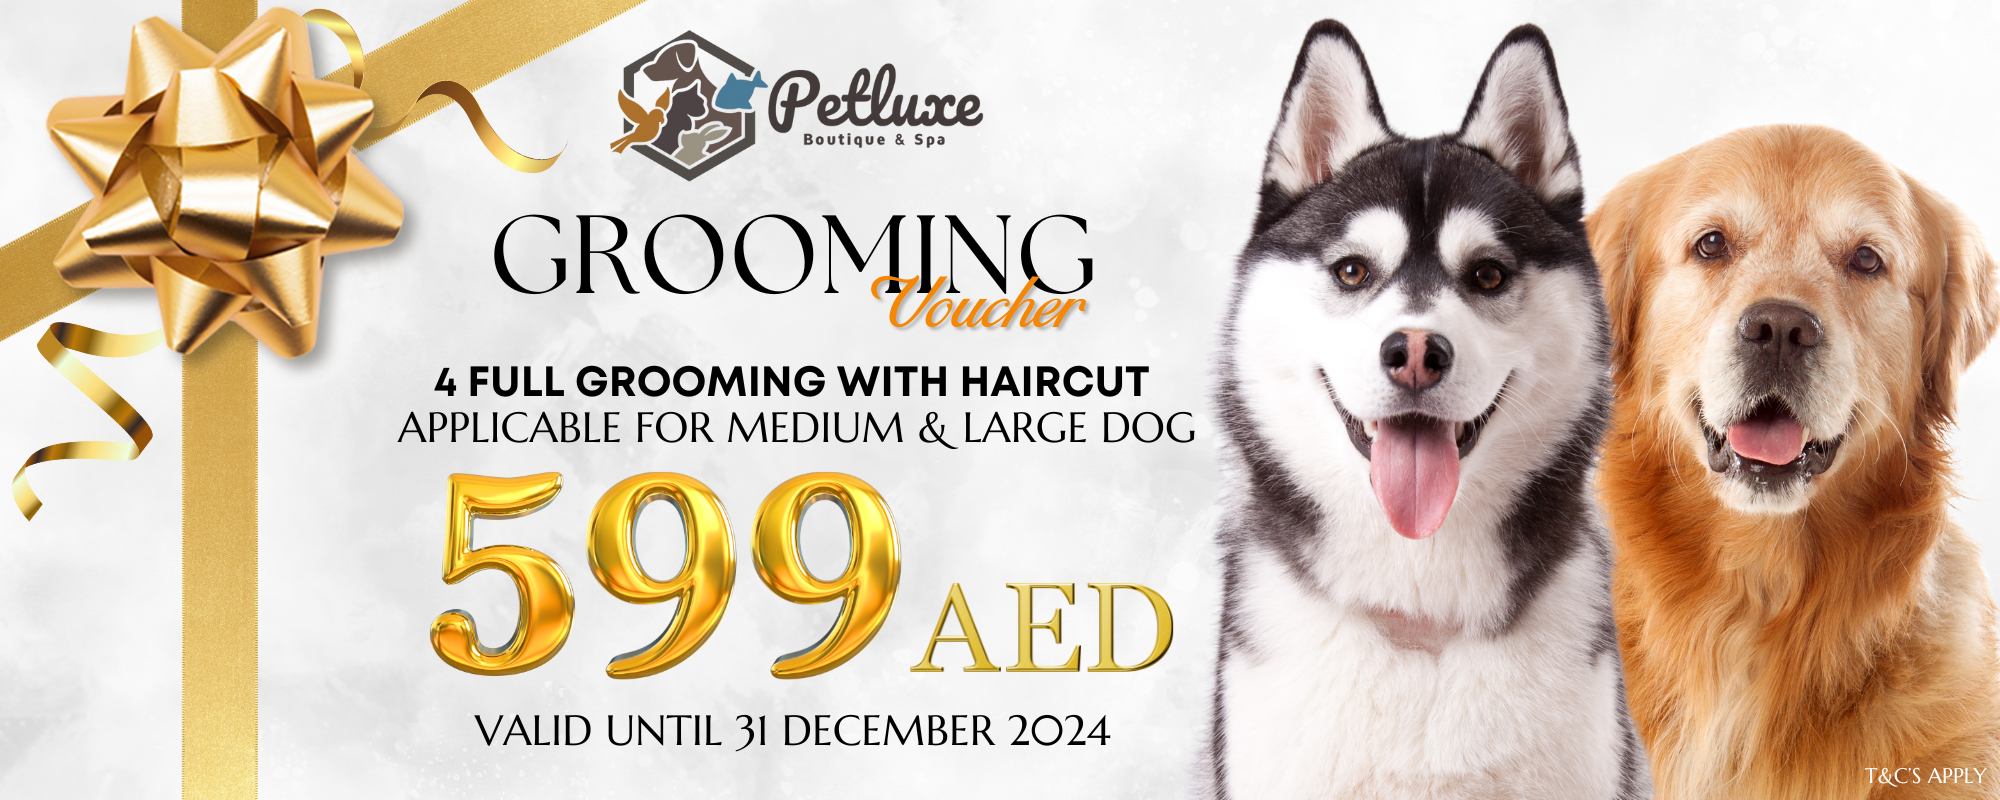 Pet Grooming Voucher for a Medium Dog or Large Dog